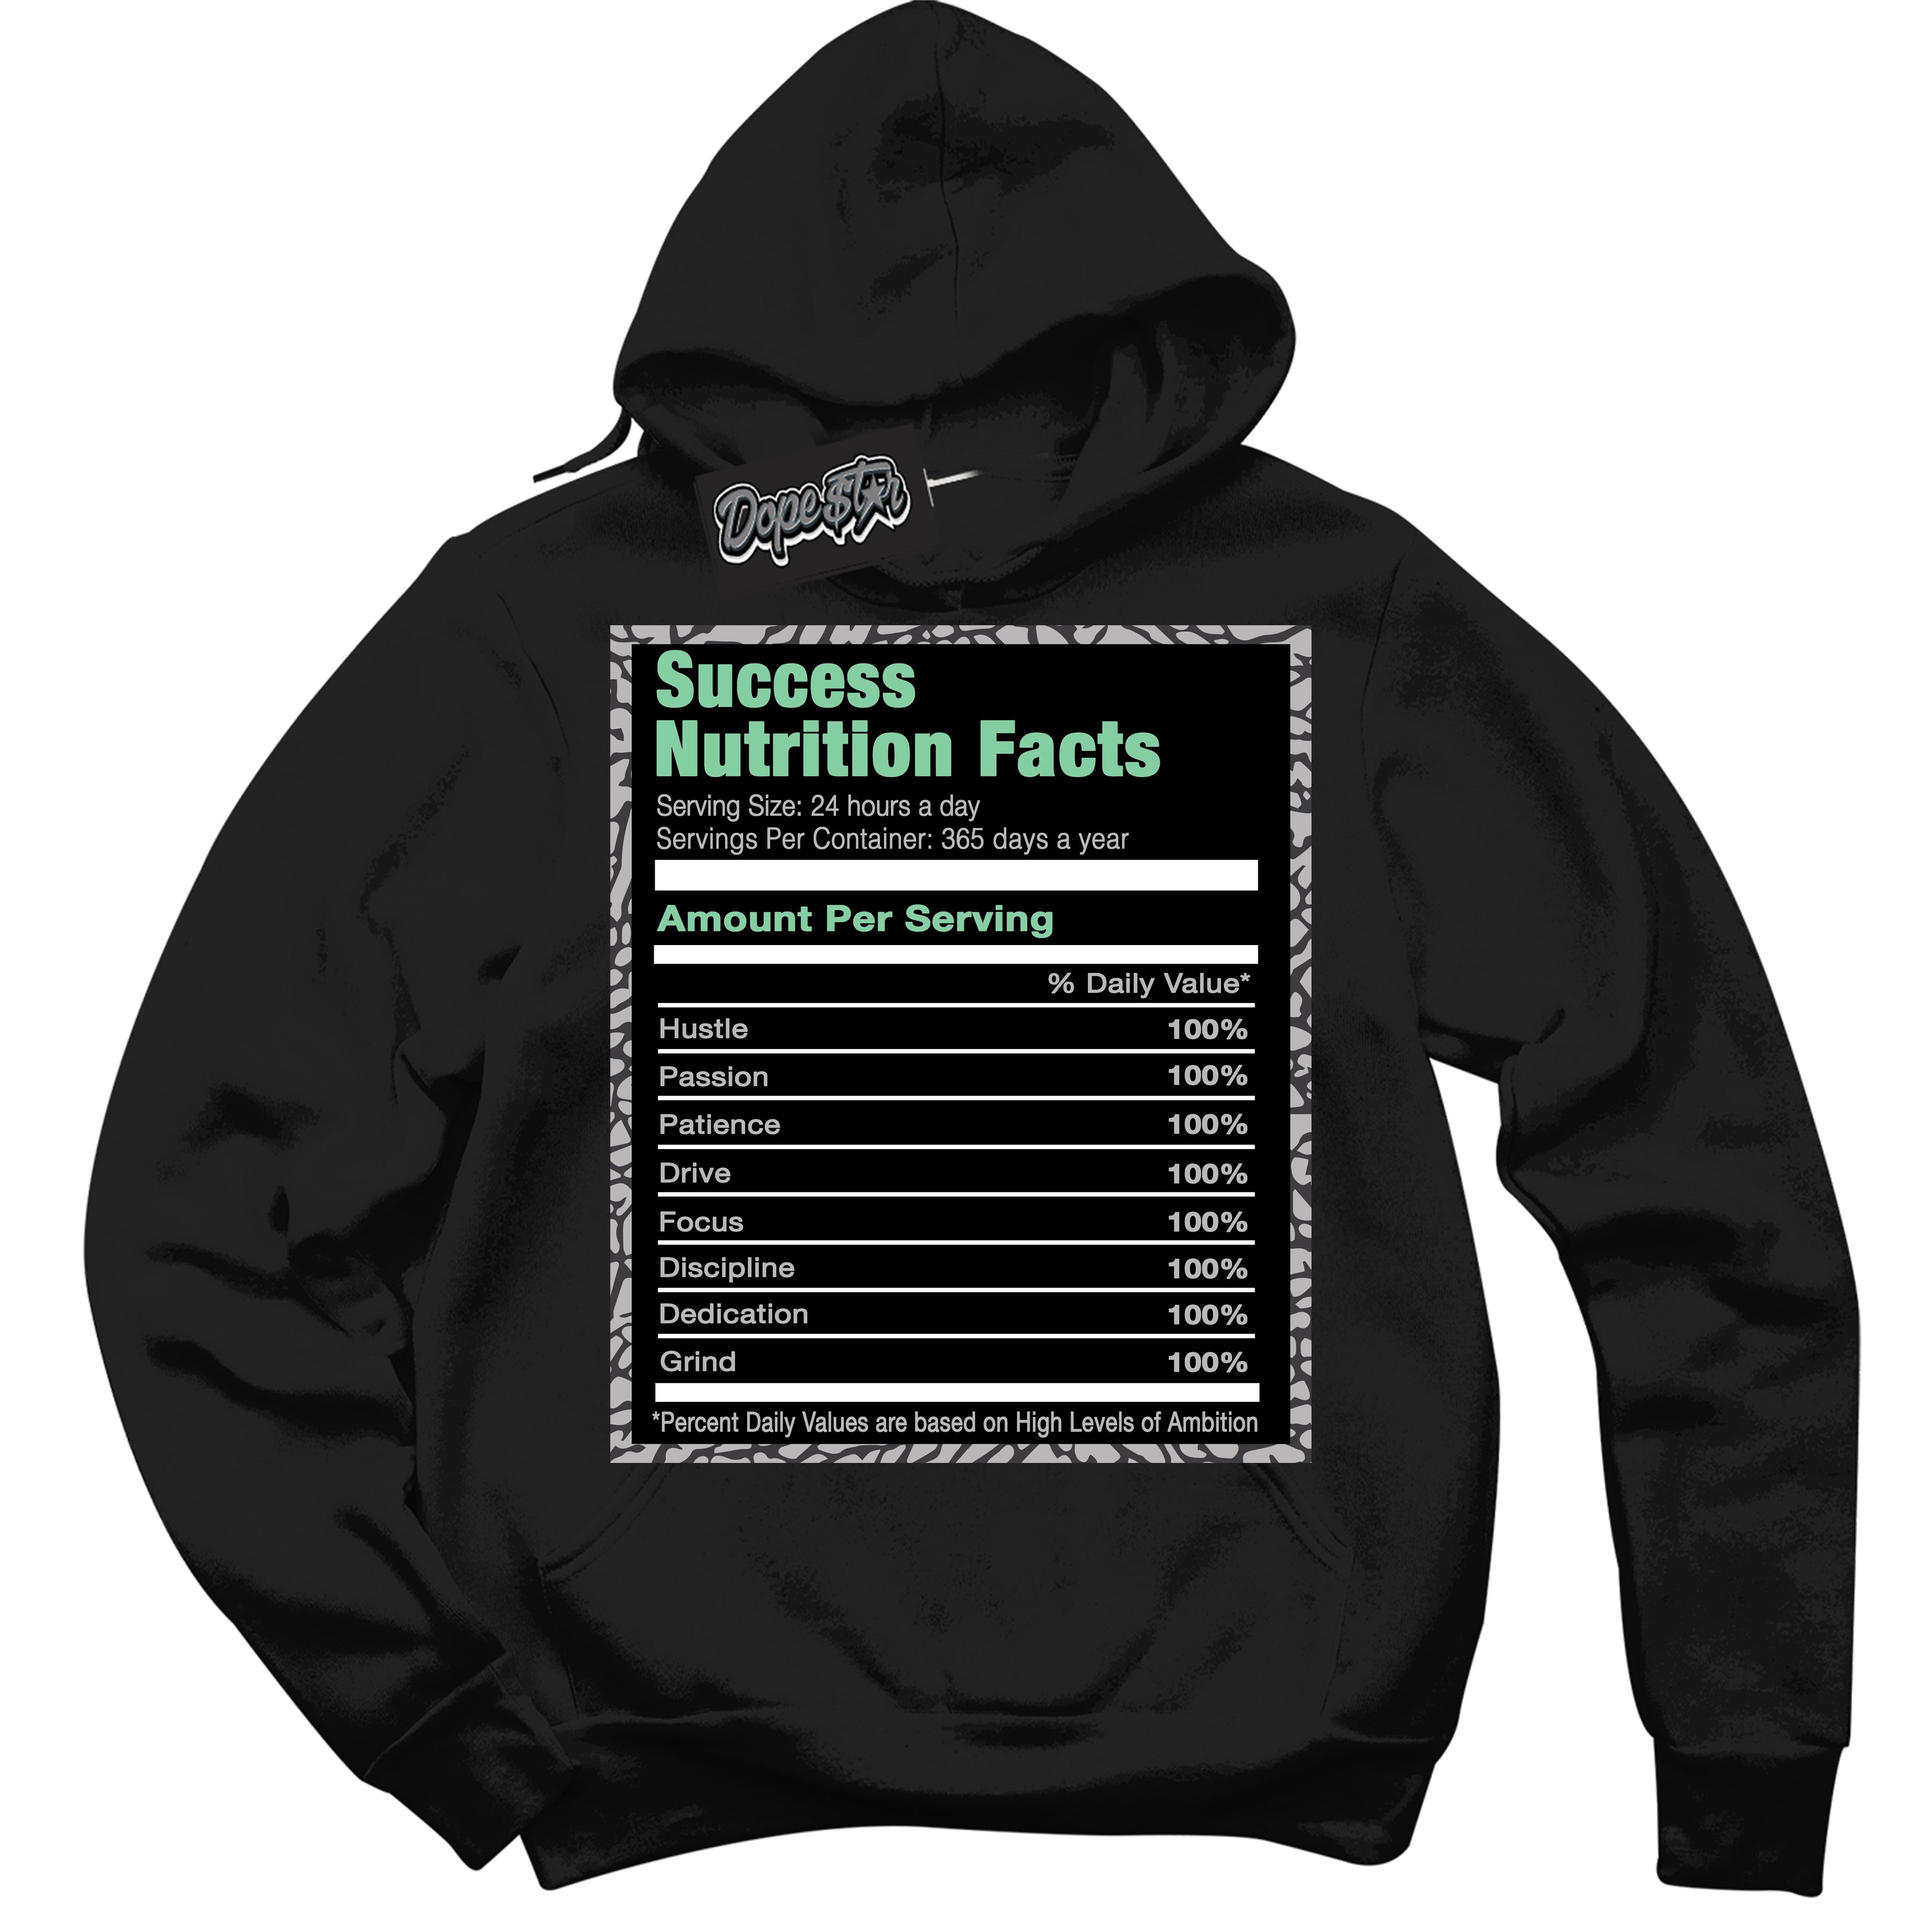 Cool Black Graphic DopeStar Hoodie with “ Success Nutrition “ print, that perfectly matches Green Glow 3S sneakers